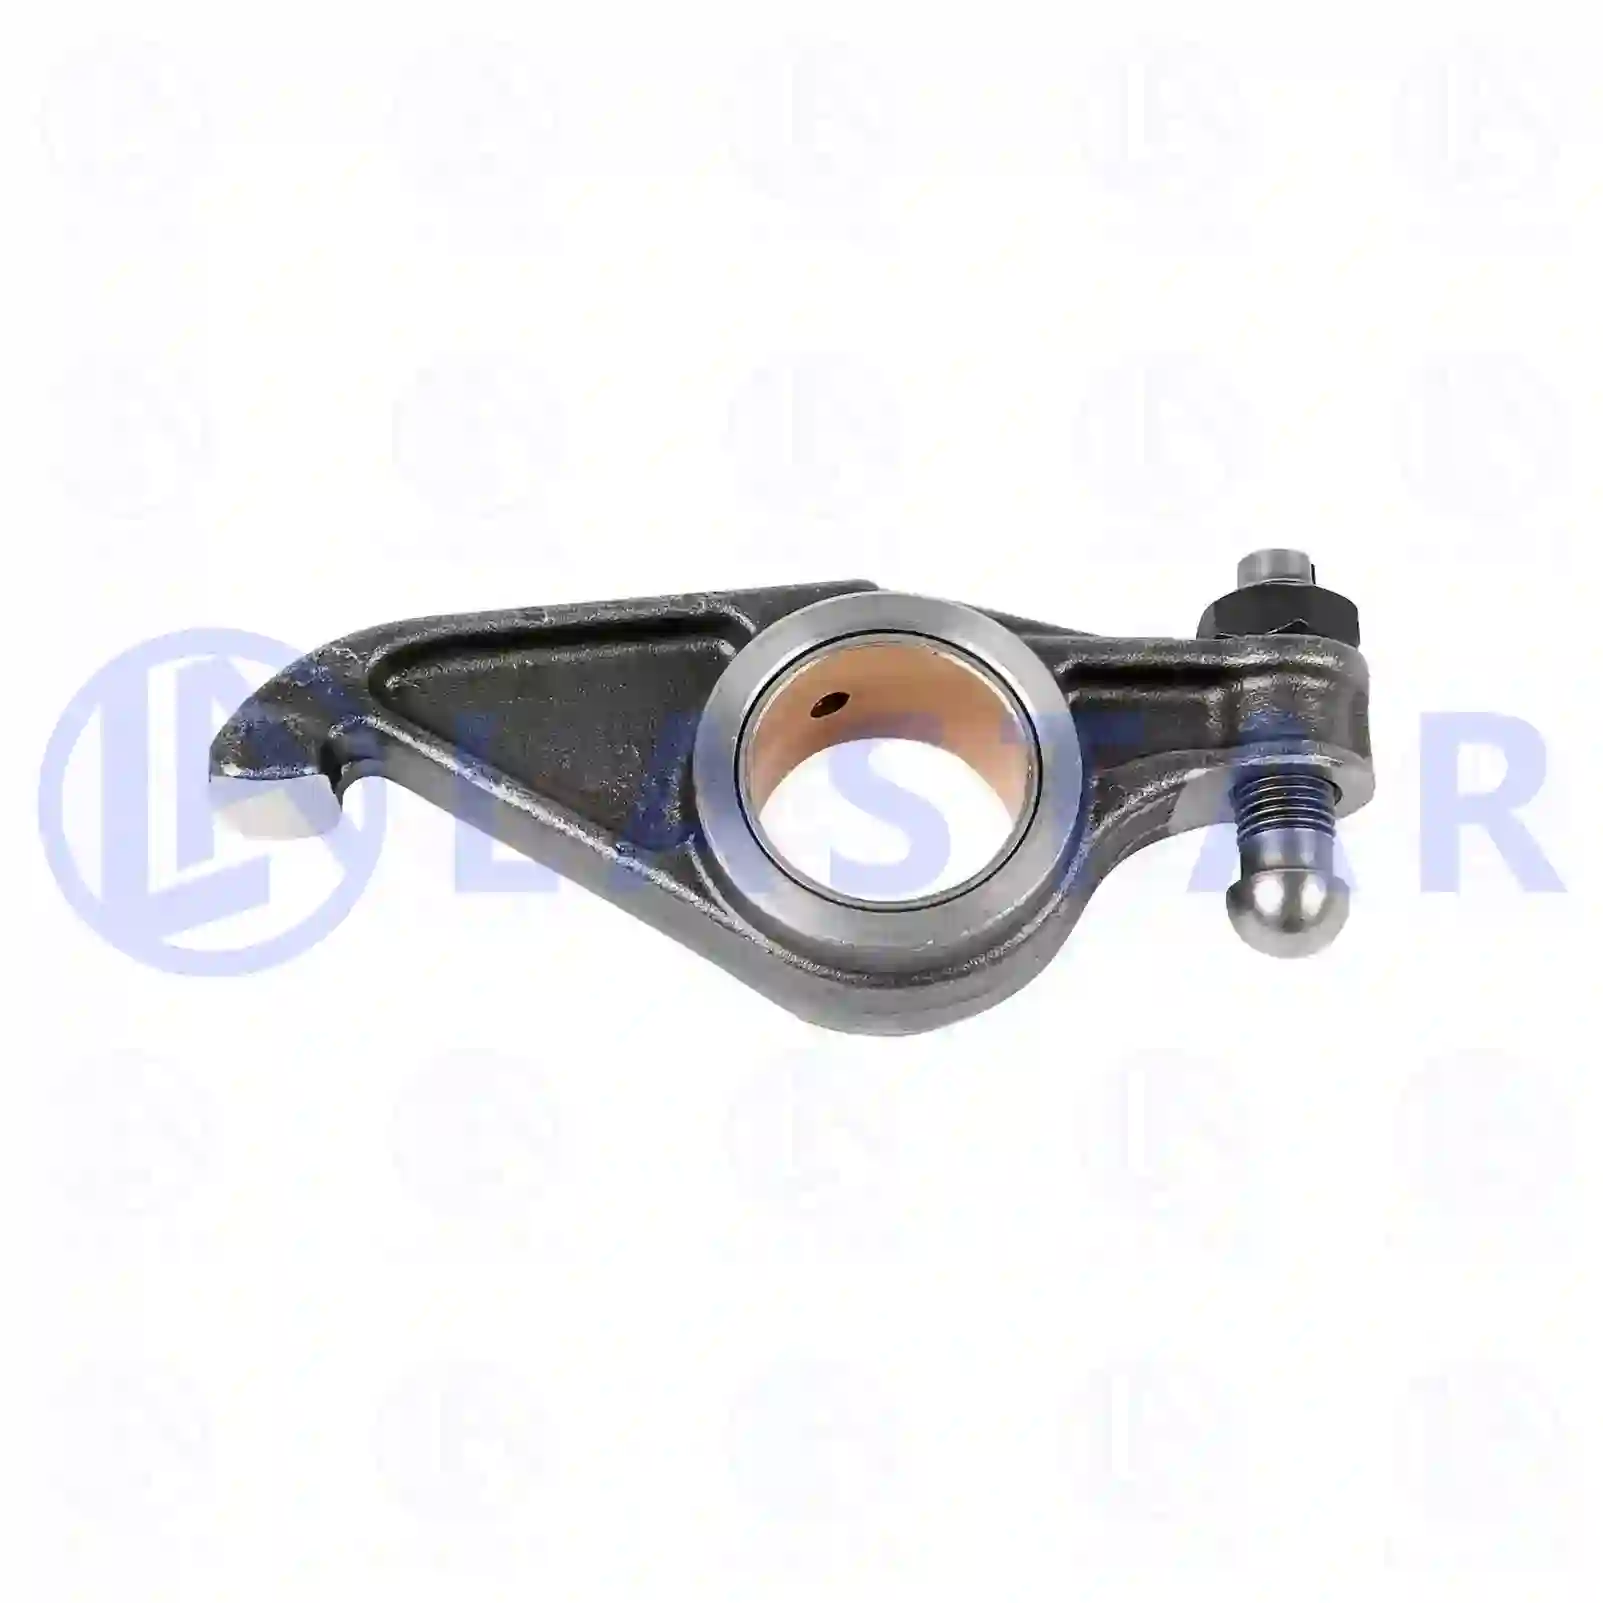 Rocker arm, intake and exhaust, 77701517, 423263 ||  77701517 Lastar Spare Part | Truck Spare Parts, Auotomotive Spare Parts Rocker arm, intake and exhaust, 77701517, 423263 ||  77701517 Lastar Spare Part | Truck Spare Parts, Auotomotive Spare Parts